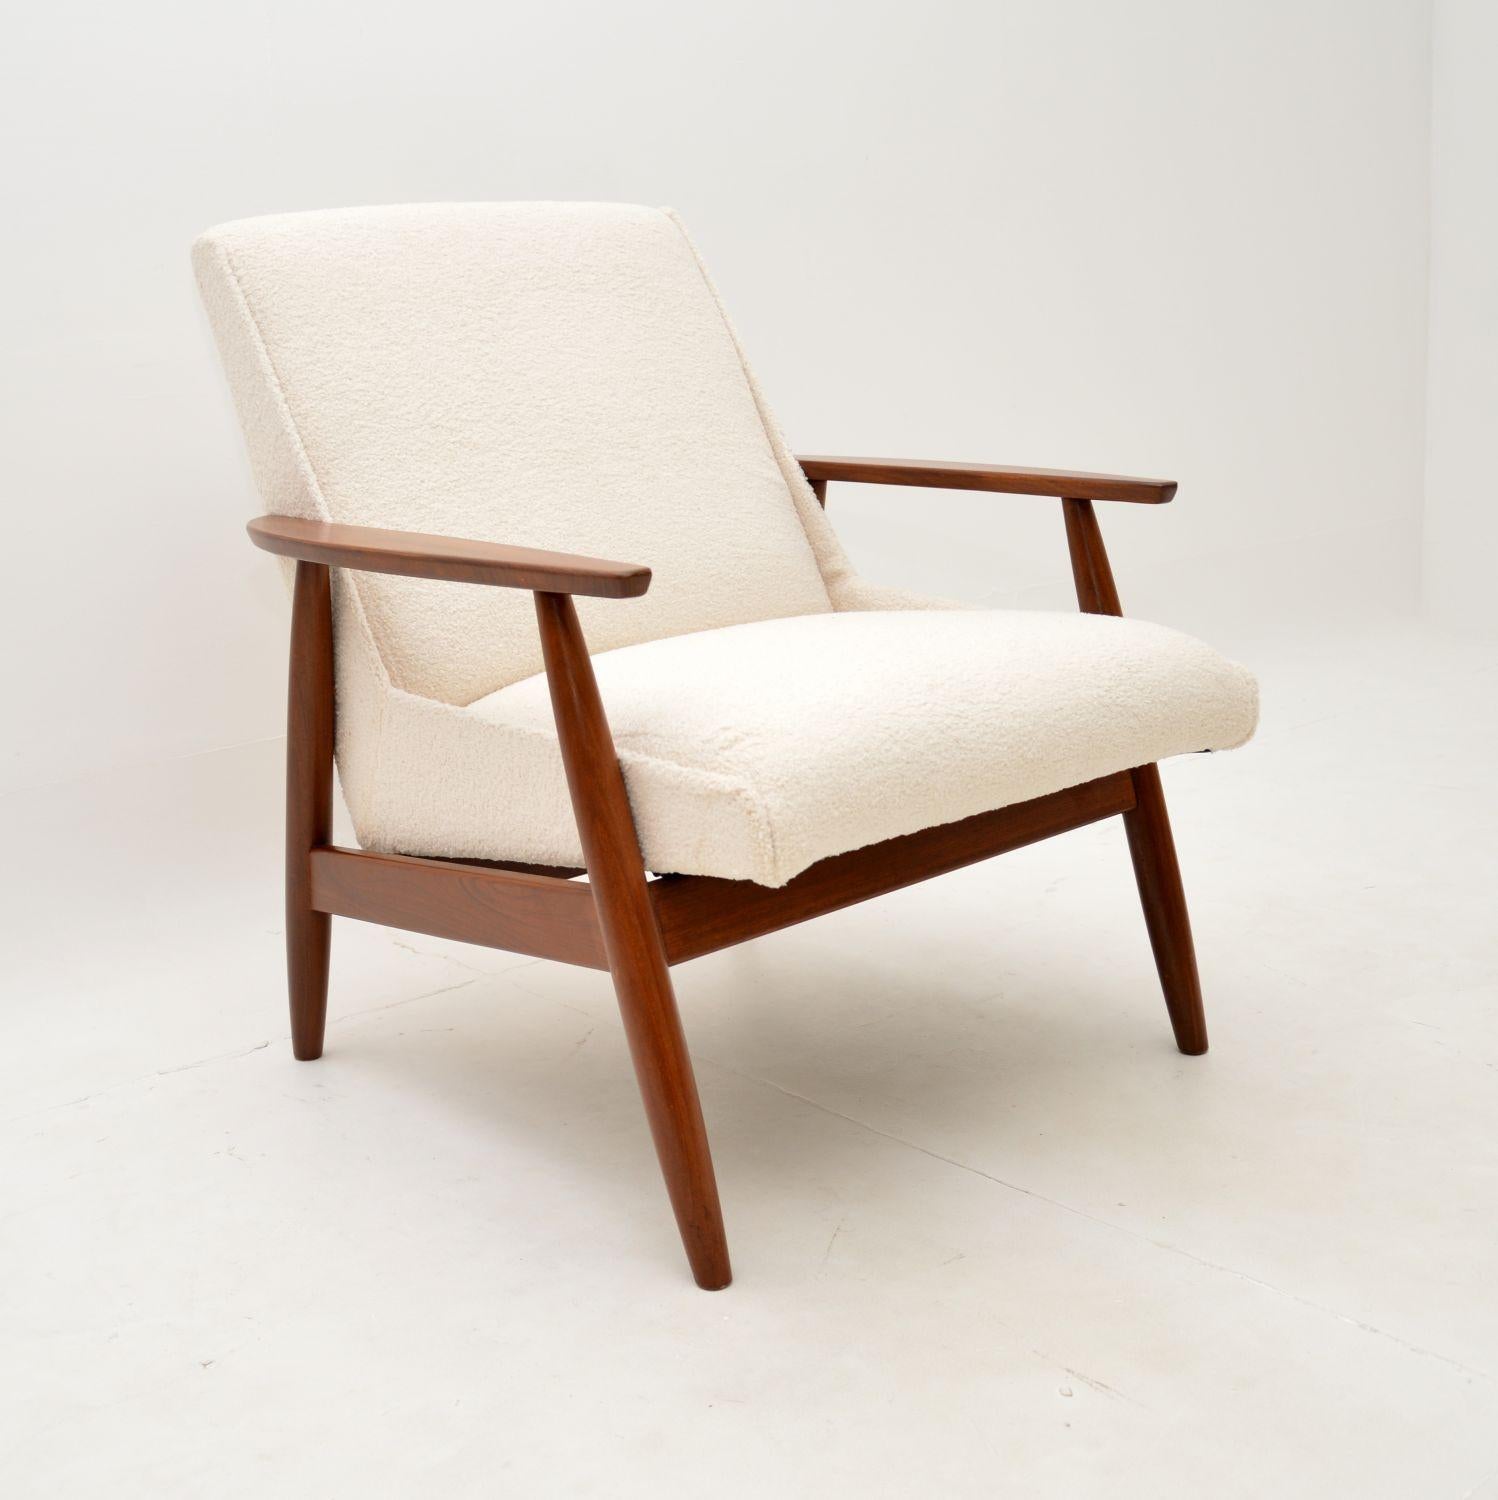 Mid-20th Century Pair of Danish Vintage Armchairs For Sale